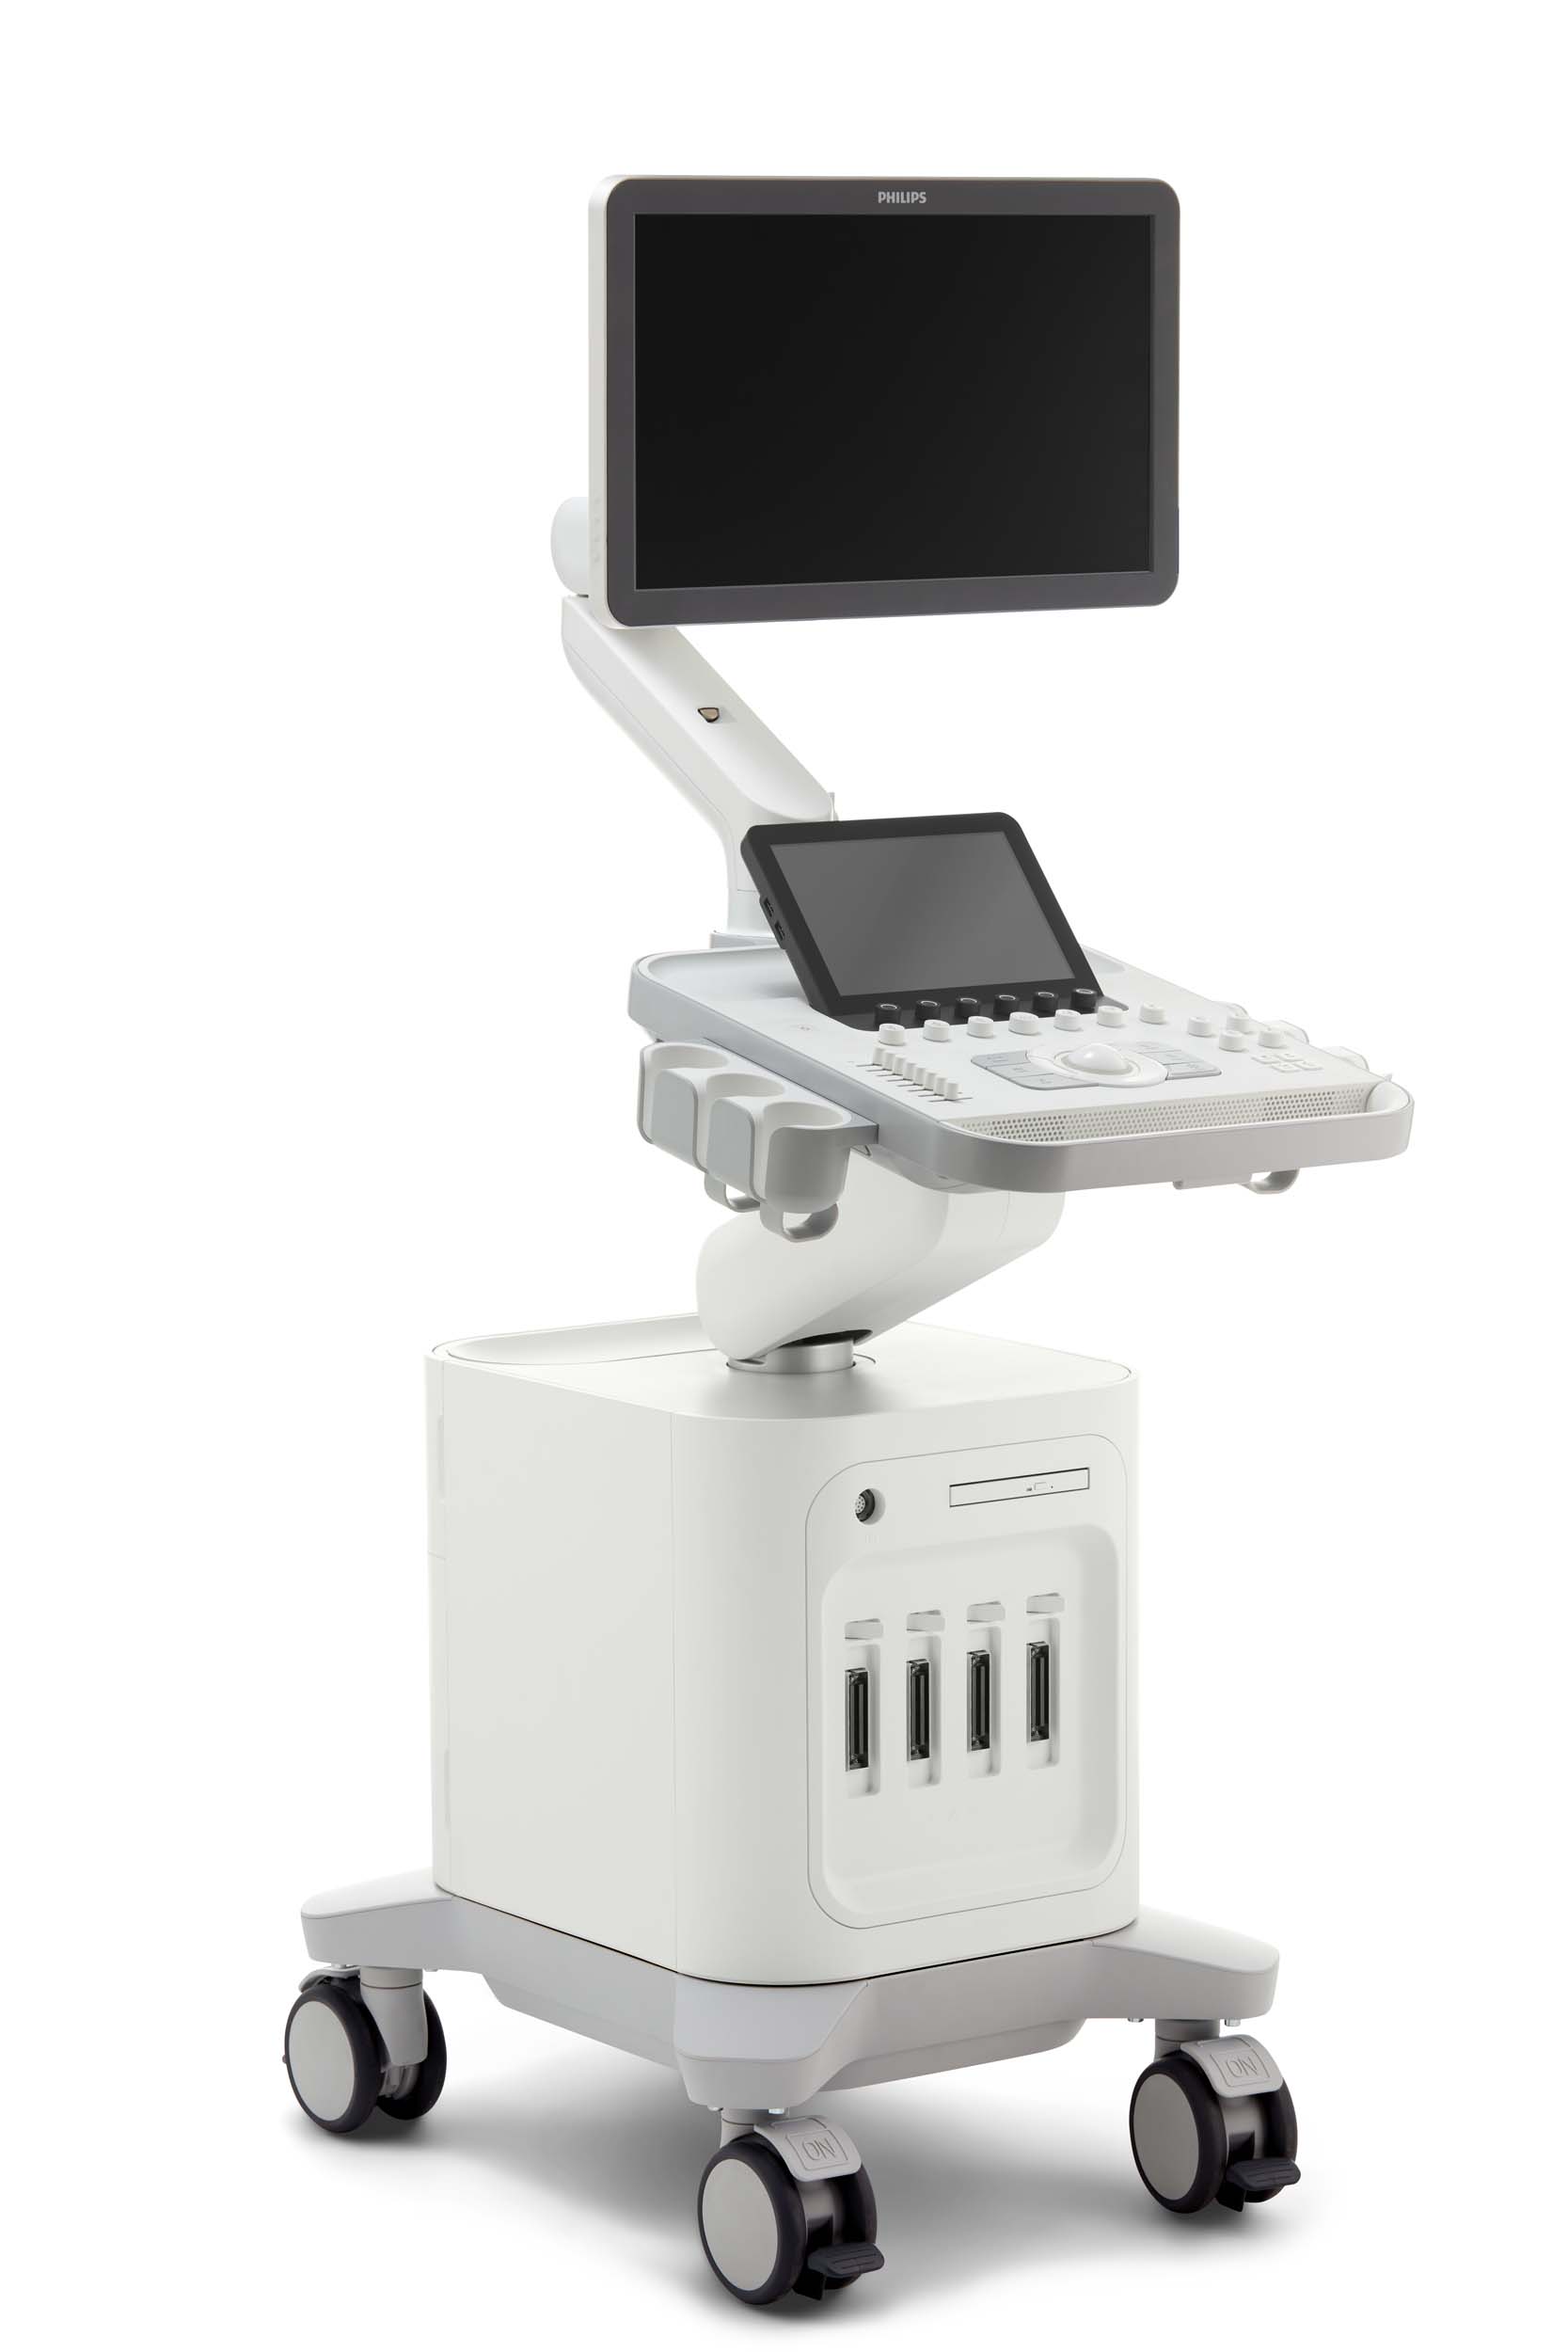 Philips introduces breakthrough Ultrasound 3300 system in India for Obstetrics & Gynecology (OBGYN), General and Cardiovascular procedures